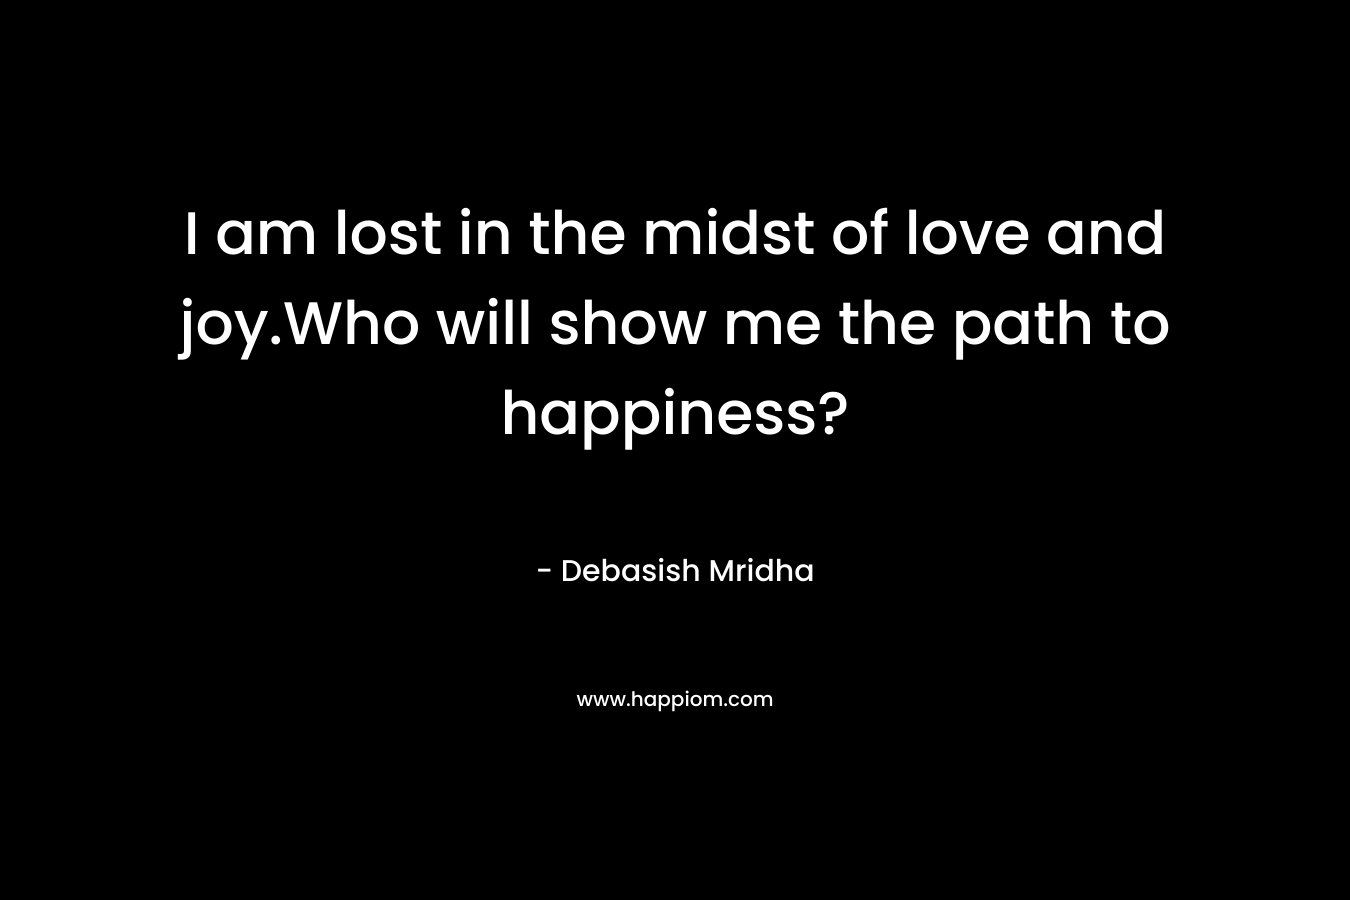 I am lost in the midst of love and joy.Who will show me the path to happiness?